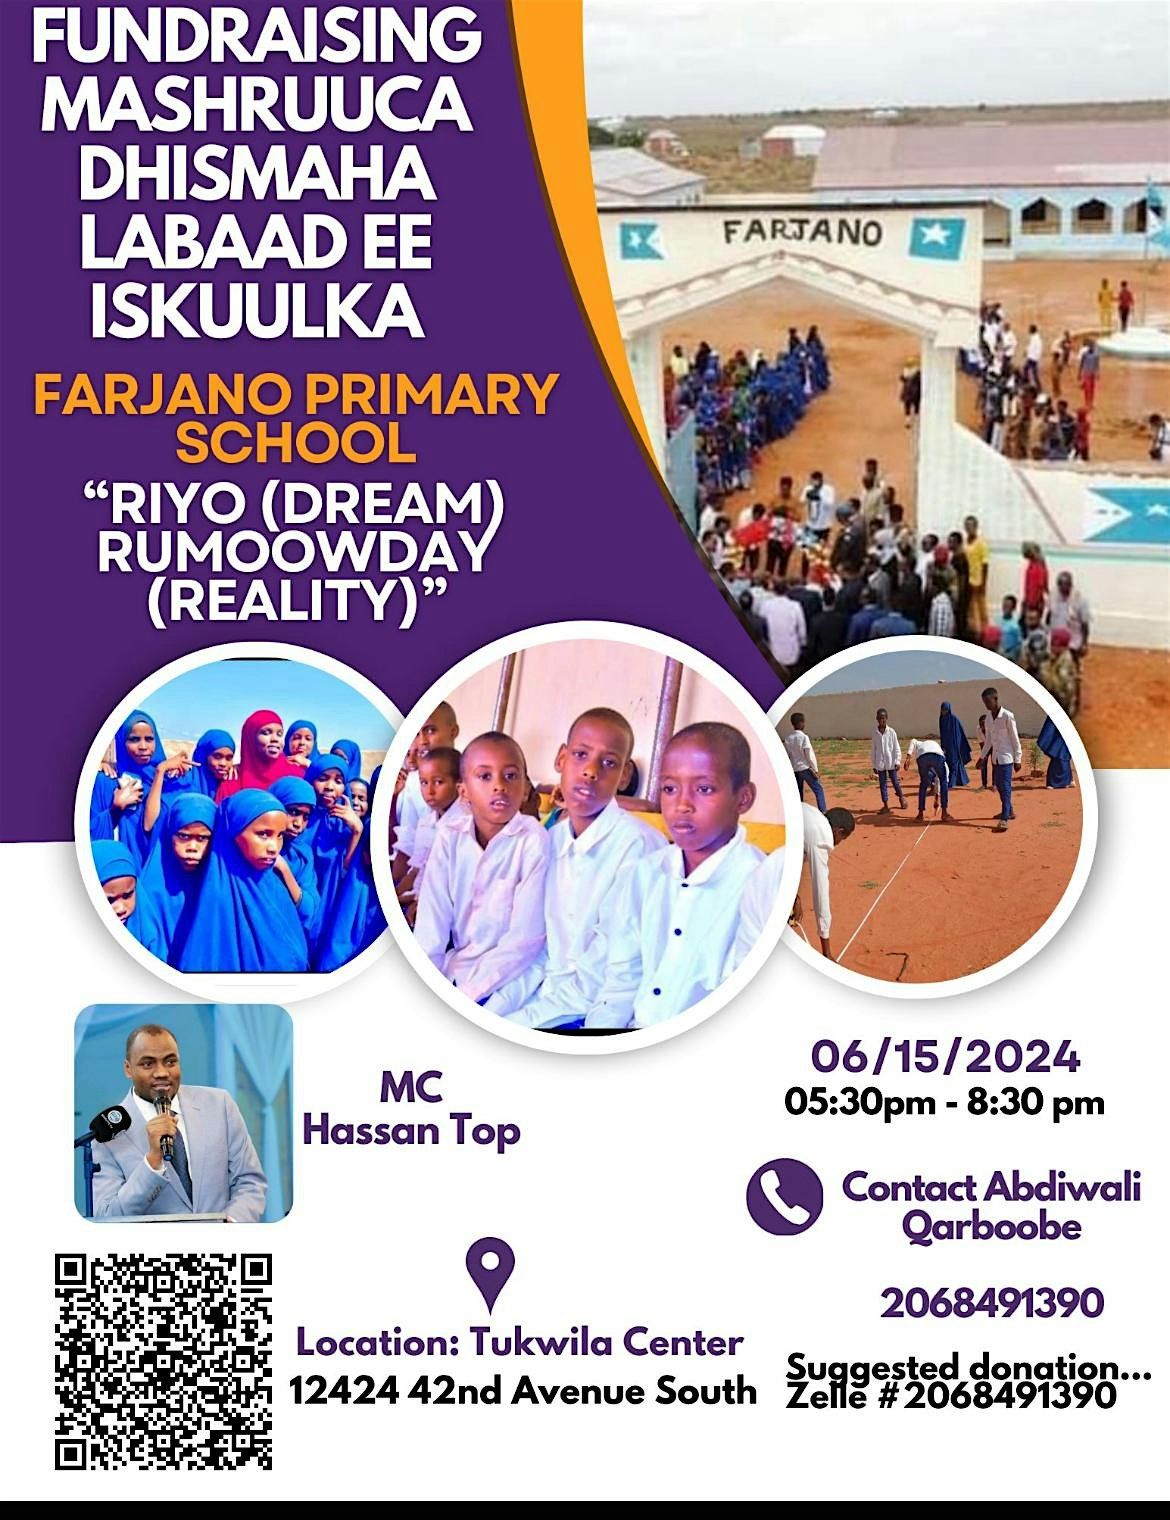 Fundraising for the Second Phase Construction of Farjano School in Somalia